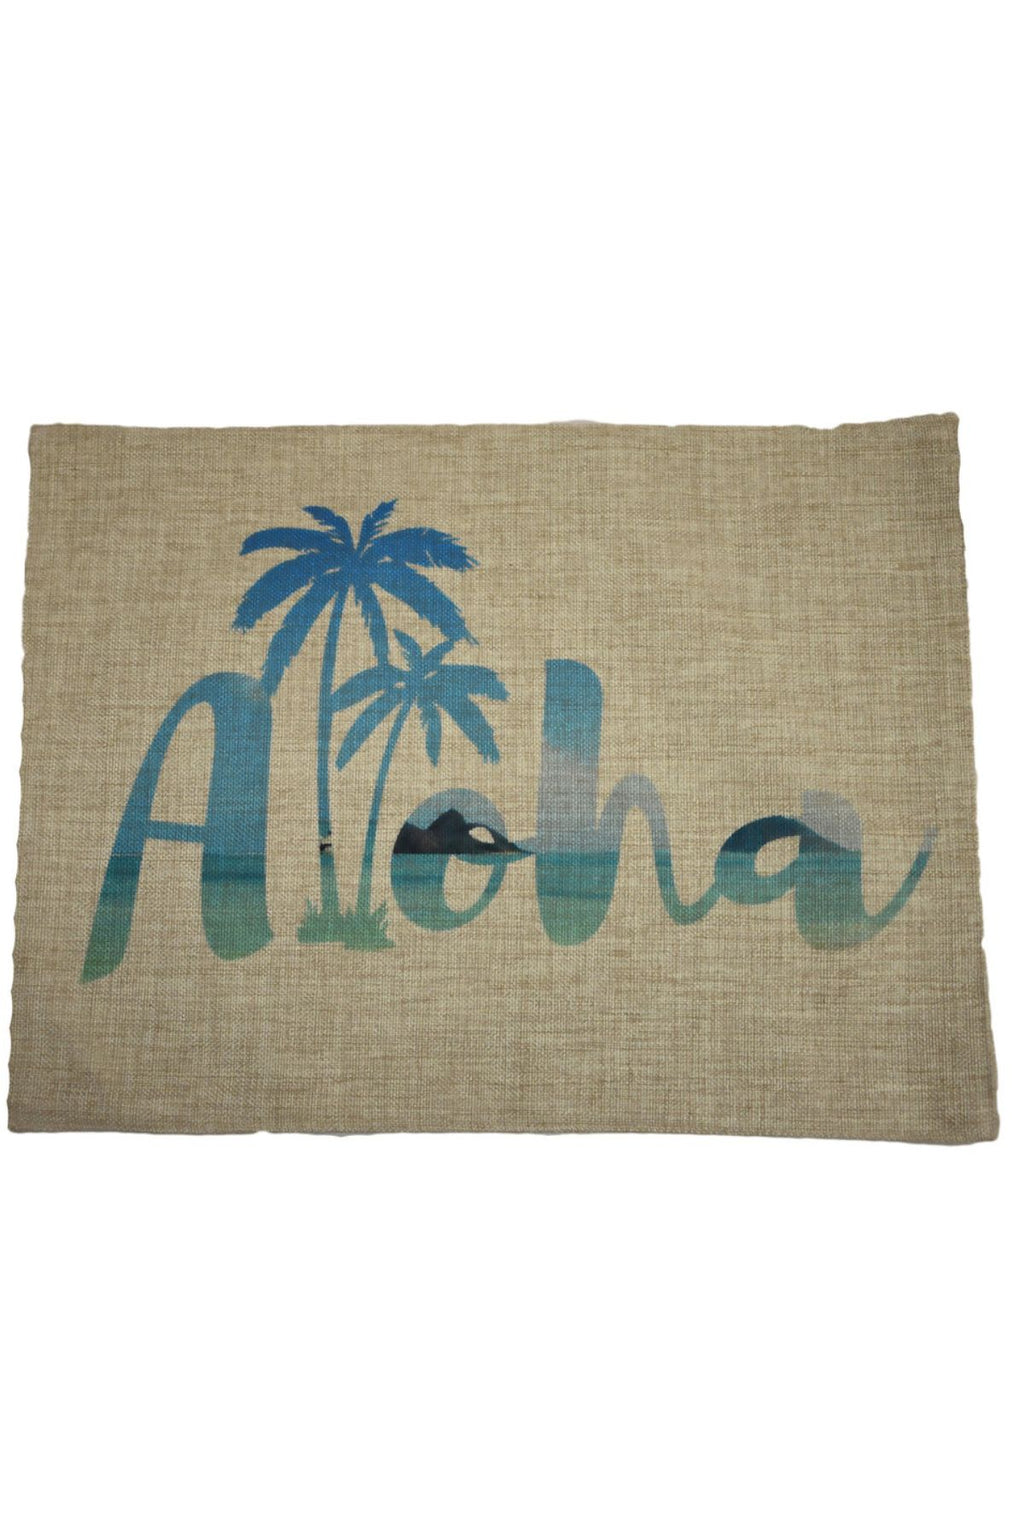 Place mat Made out of Hemp and has Fancy aloha with pal trees ion the front.